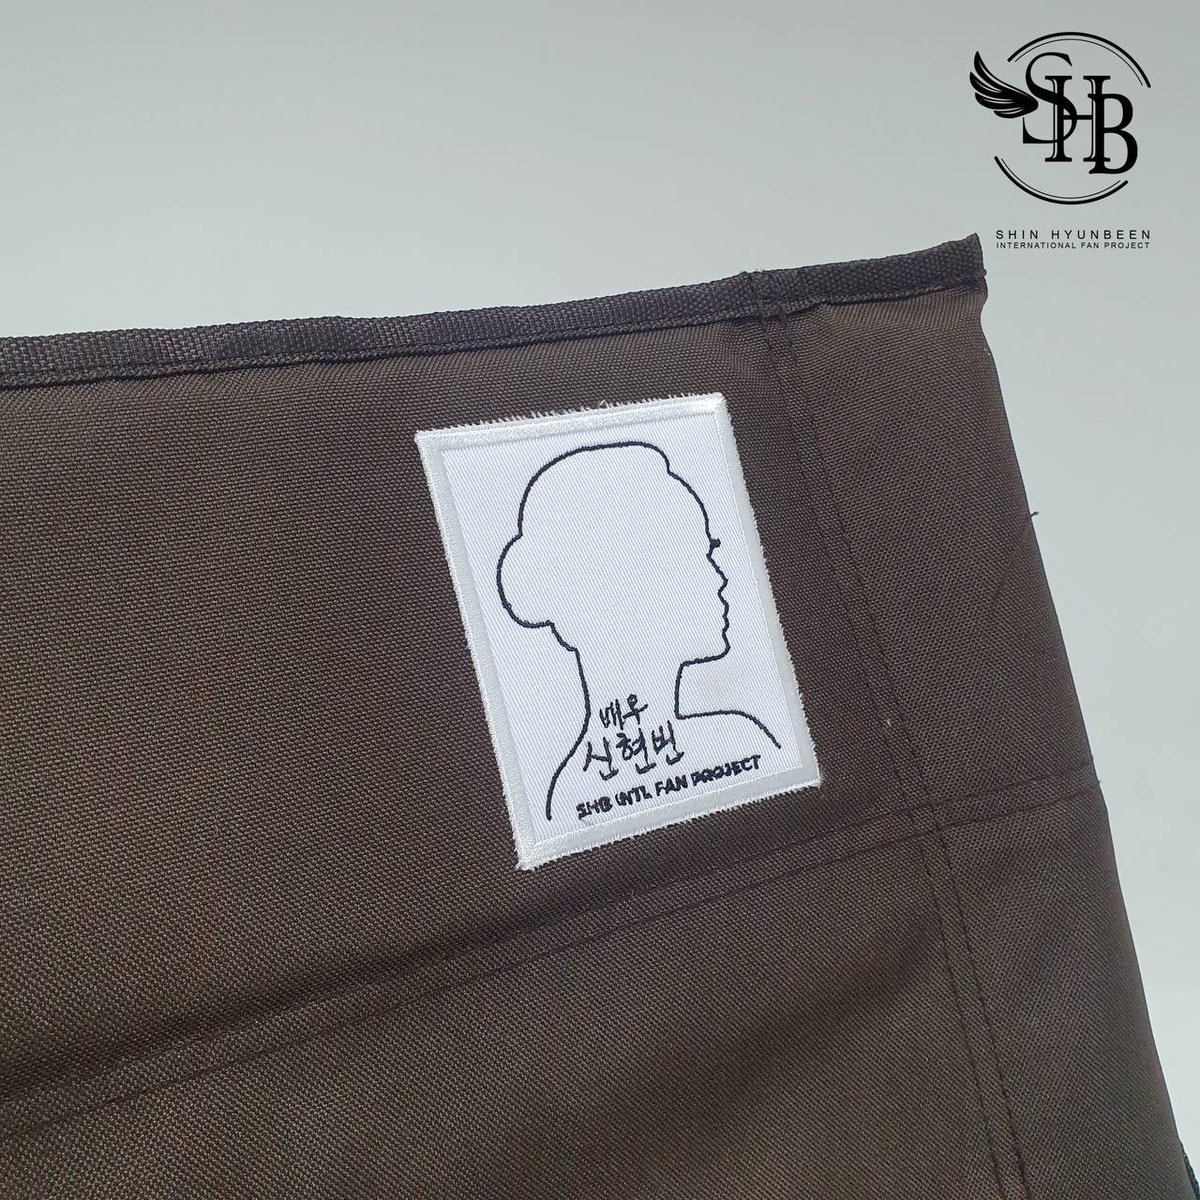 Closer look at the customized camping chair with 'HYUNBEENSHIN' embroidery and logo made by @hey_joodles that she might use not just for camping but during her filming #ShiningHyunbeenDay #봄처럼_따뜻한_신현빈_생일축하해